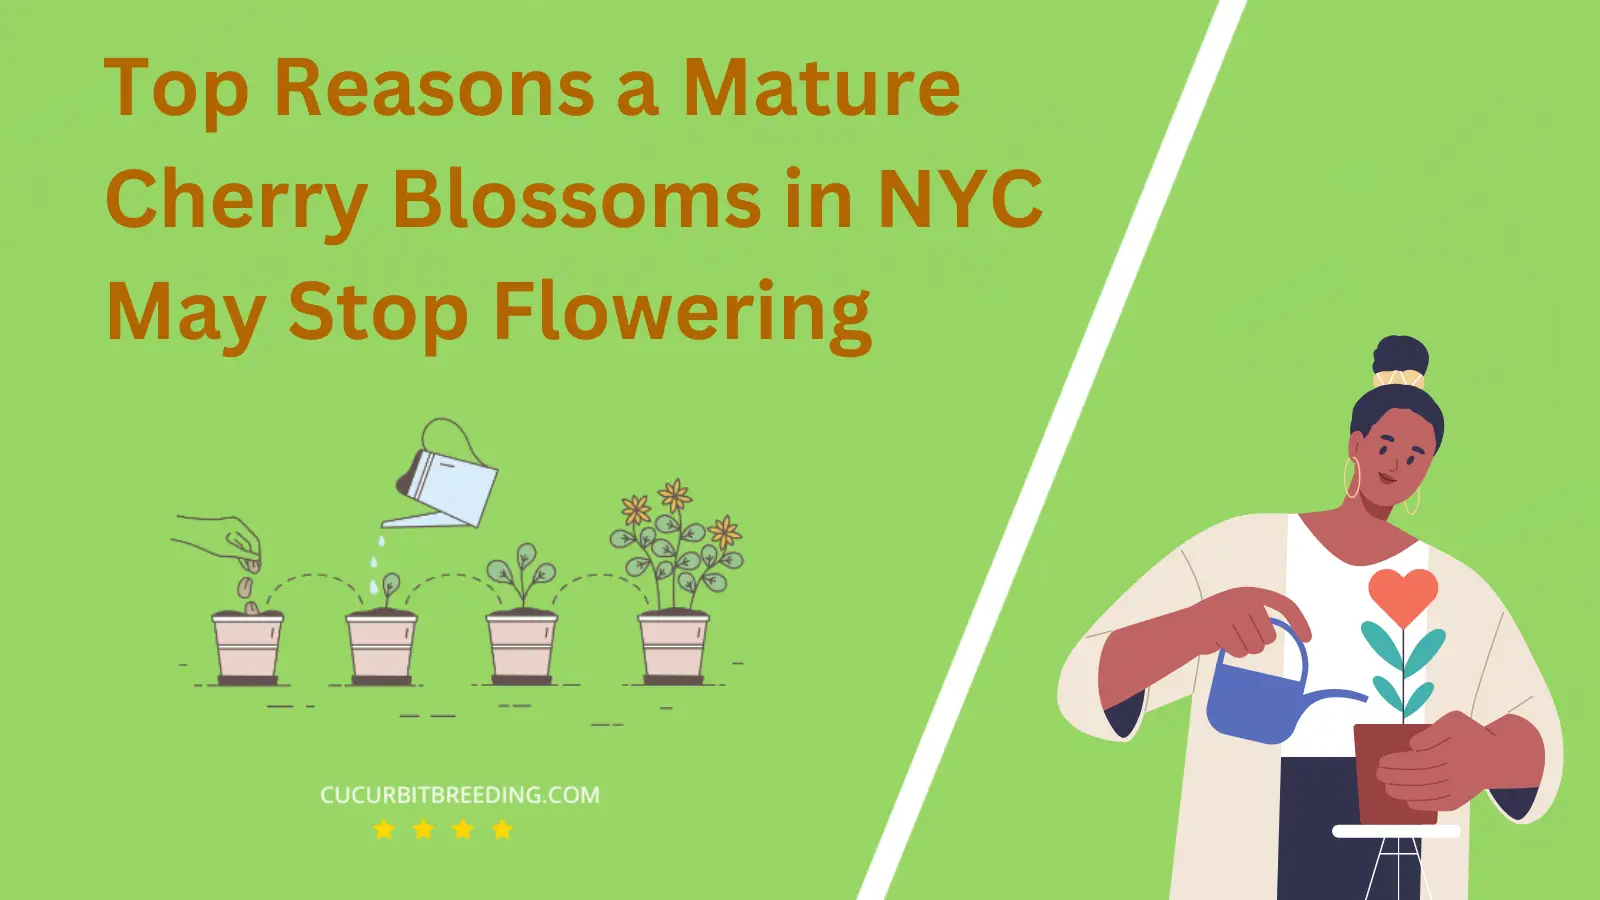 Top Reasons a Mature Cherry Blossoms in NYC May Stop Flowering